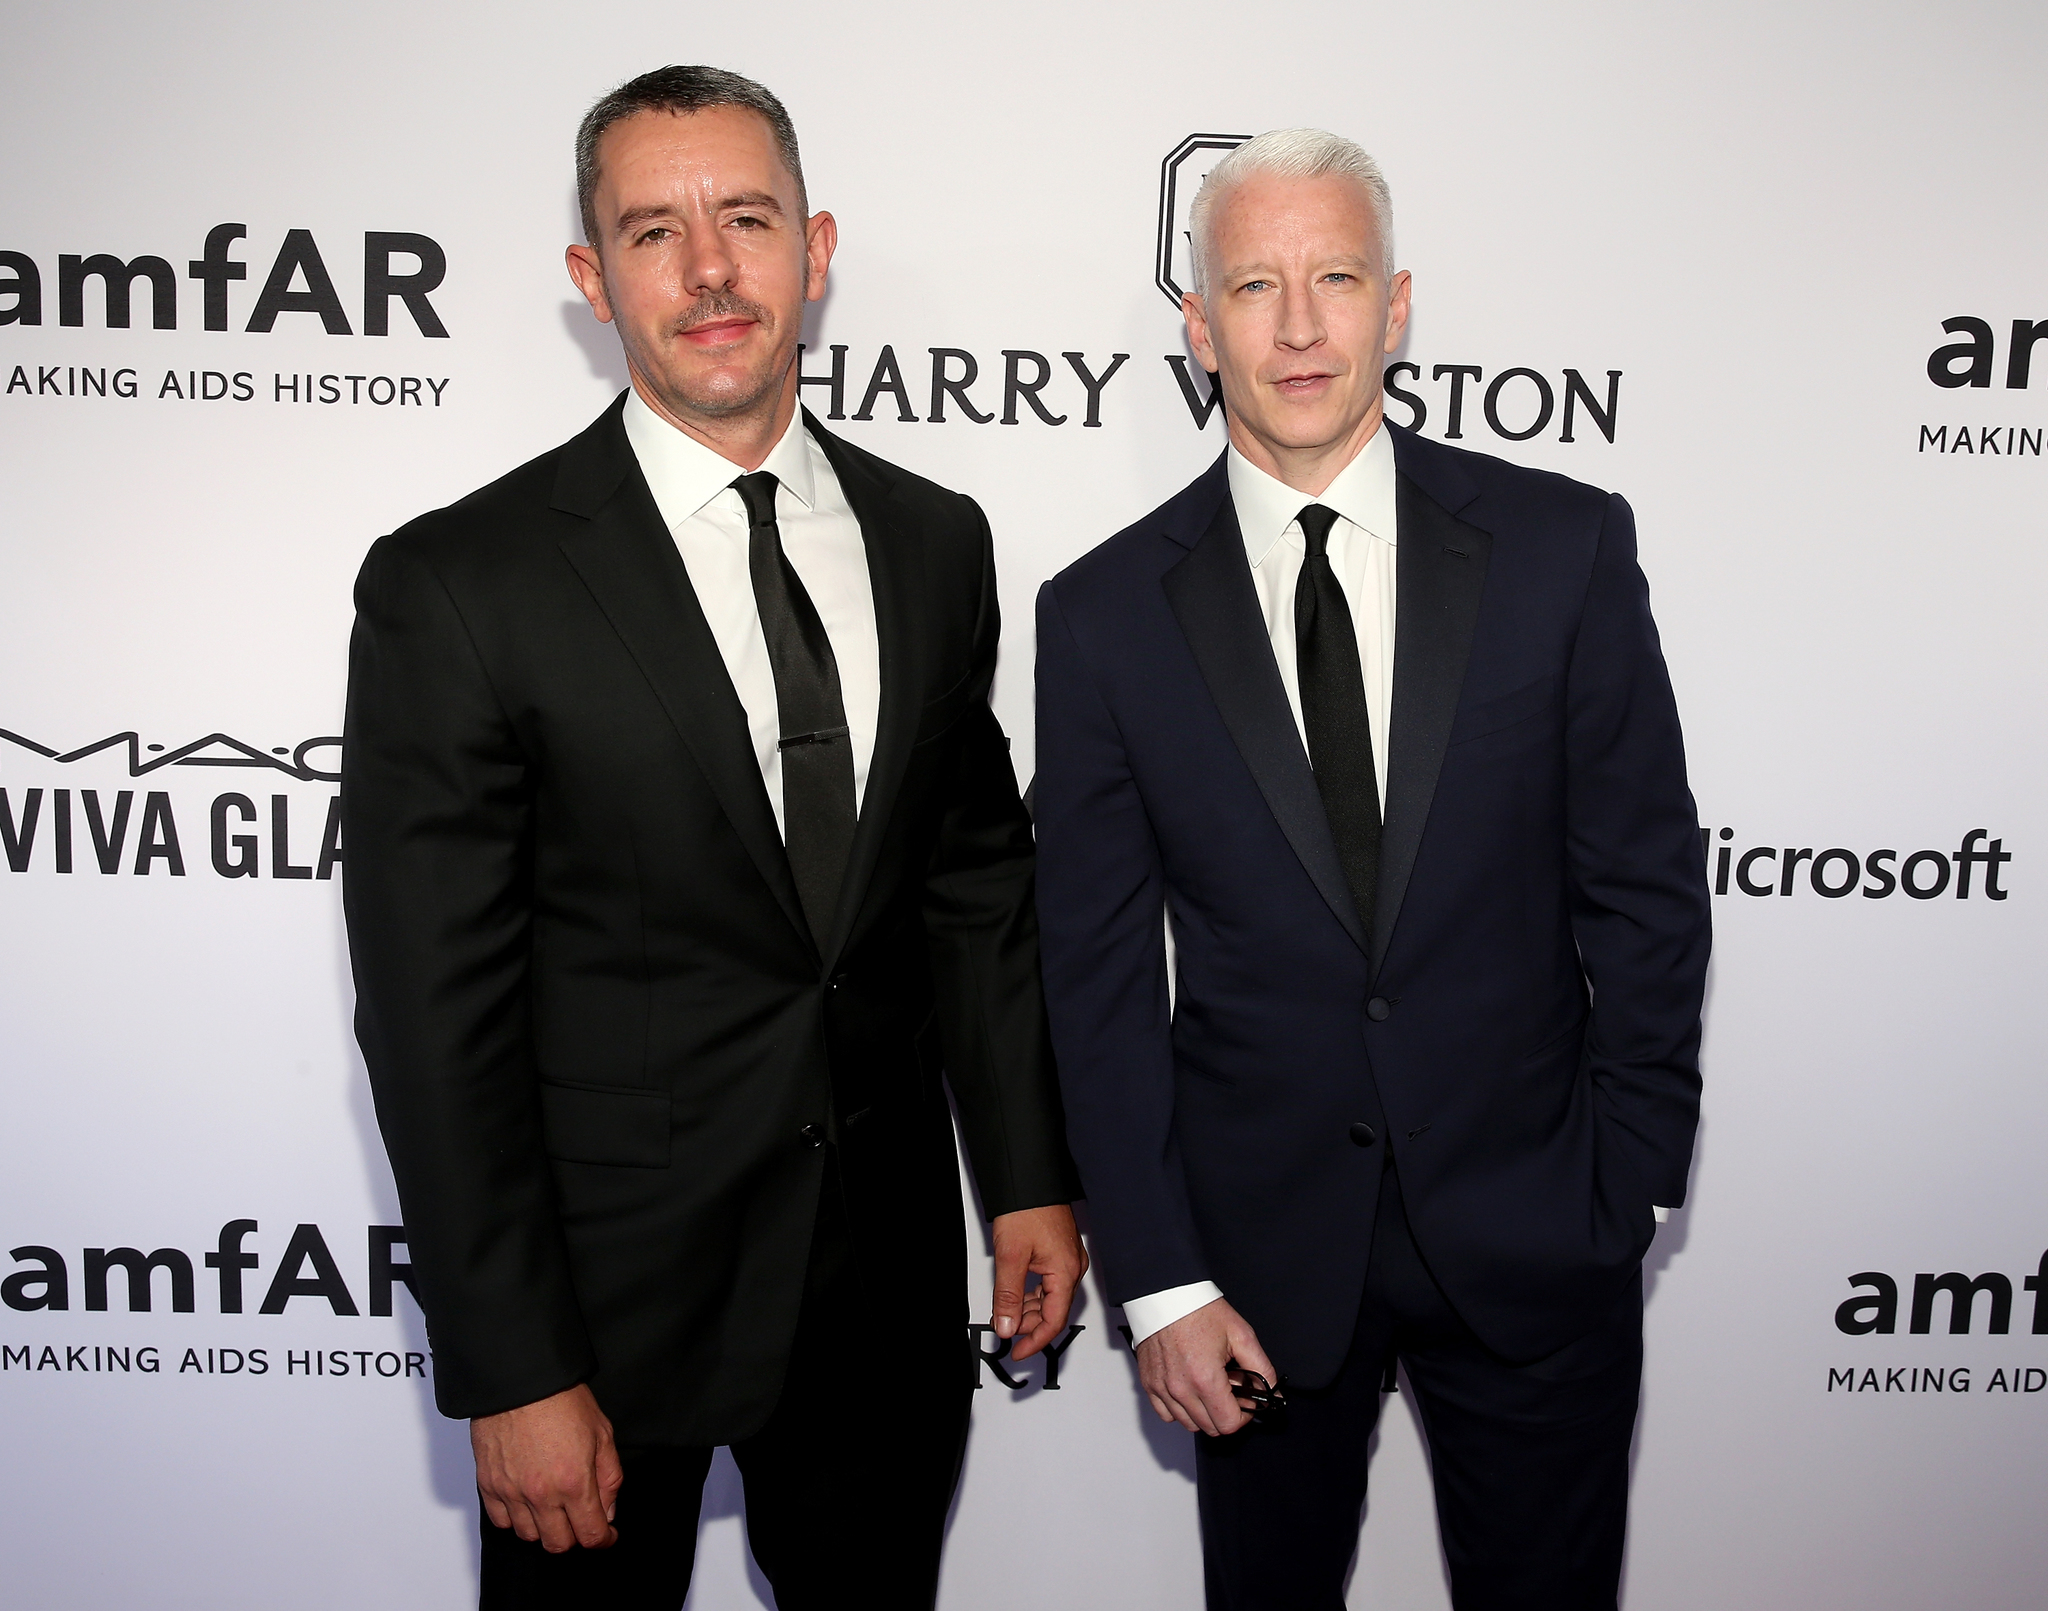 Anderson Cooper and Neilson Barnard